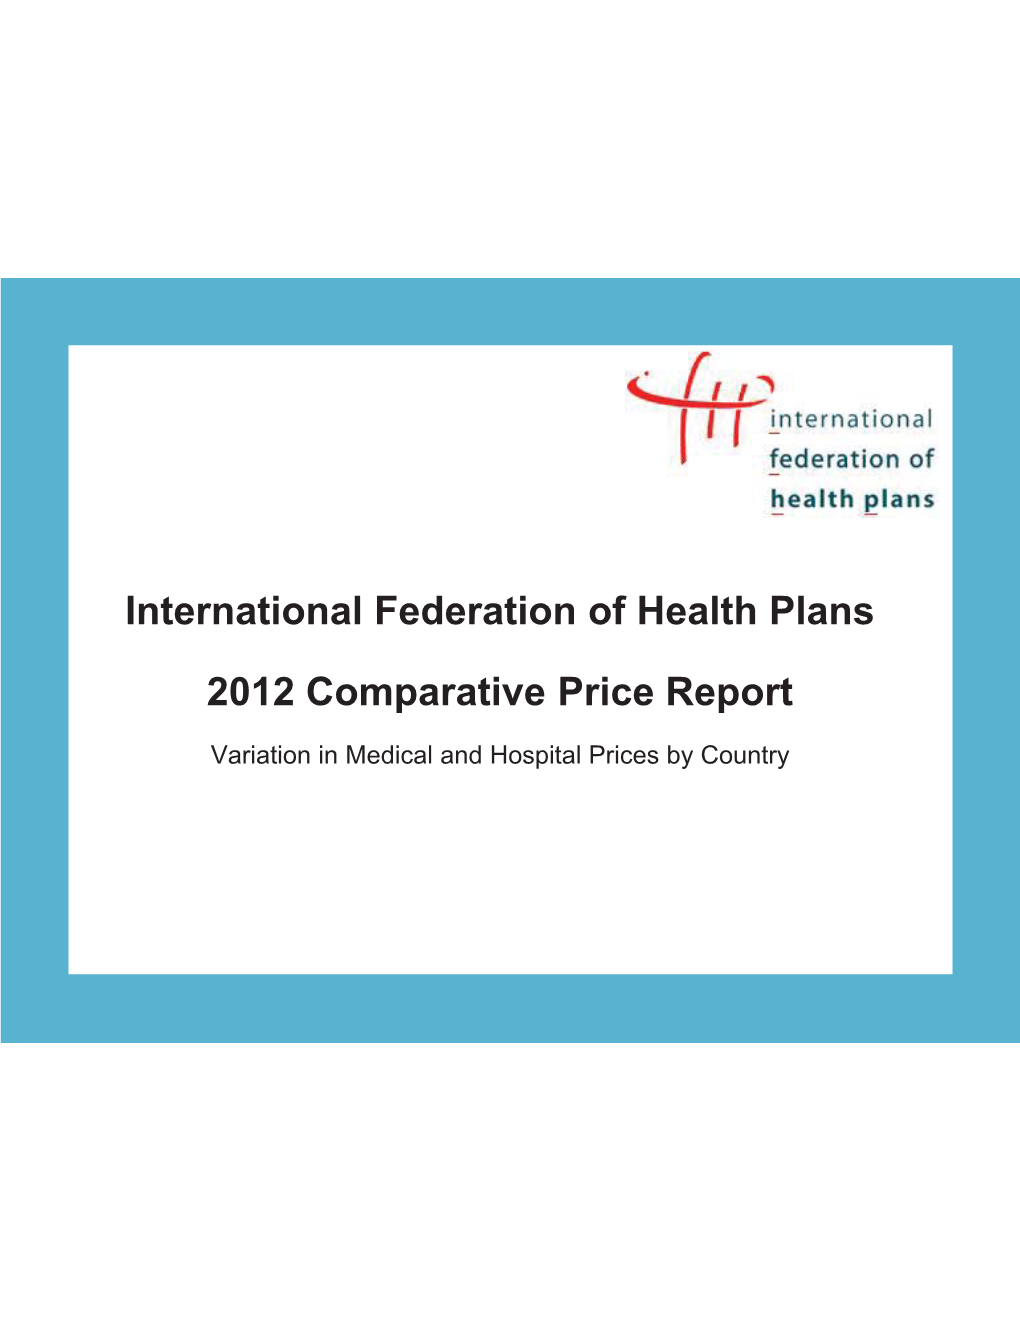 International Federation of Health Plans 2012 Comparative Price Report